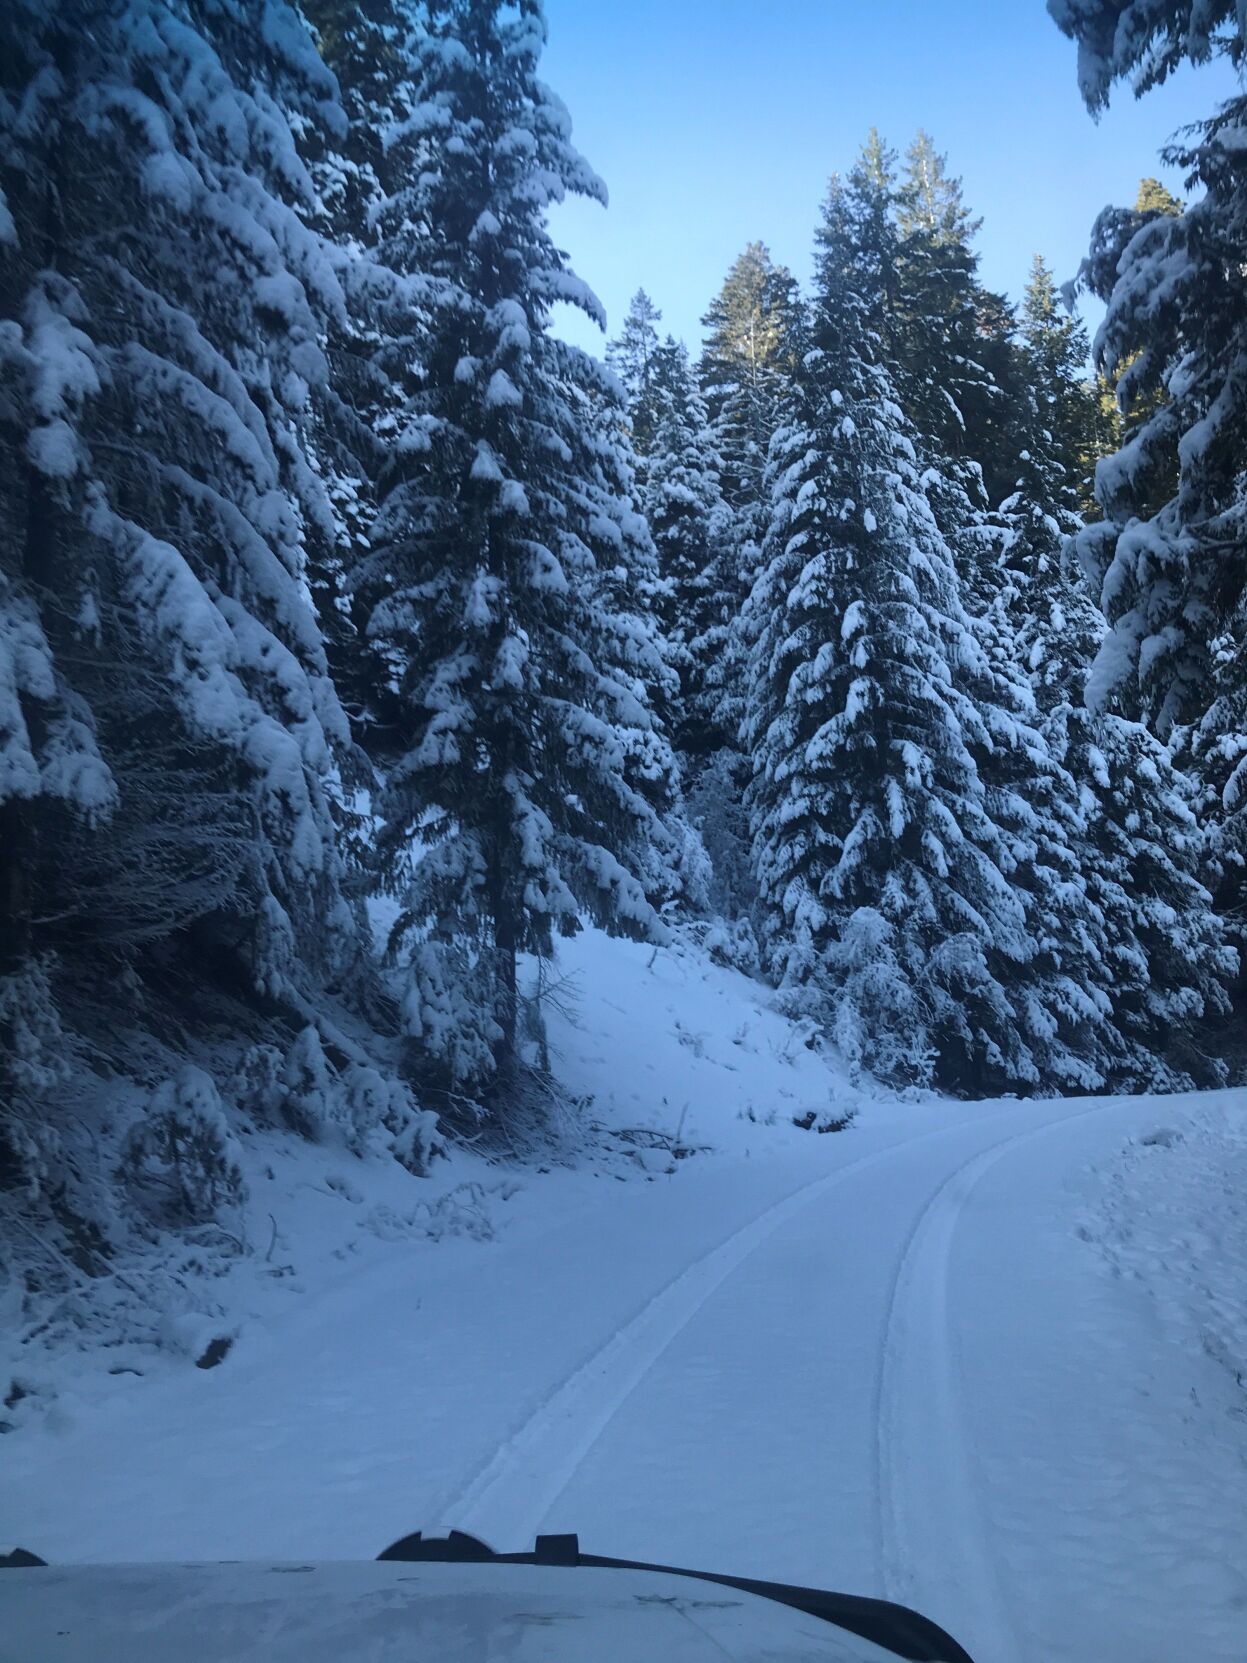 Christmas tree permit season opens today in Klamath National Forest